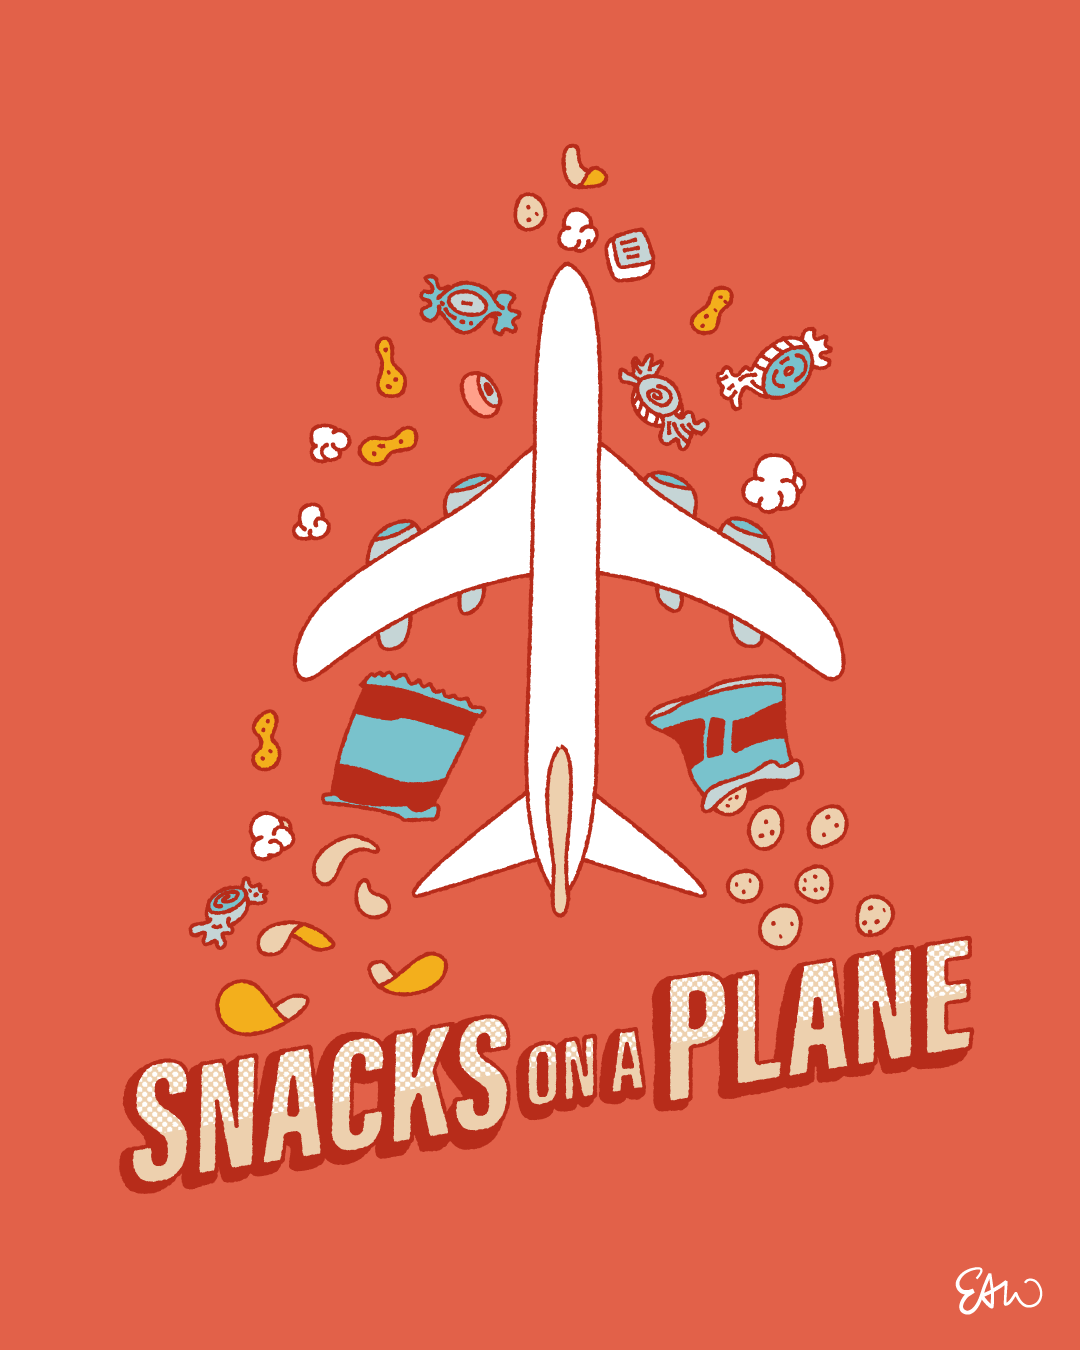 Cartoon illustration drawn in a retro style with a minimal palette of primarily faded reds, with teal green and yellows for accents and halftones for shading. The poster shows a birds-eye view of the top of a commercial airplane, centred in the composition and surrounded by spot illustrations of various examples of junk food in and out of their packaging. The caption in the lower-third of the poster is styled in the same font treatment as the original “Snakes on a Plane” movie. Instead it reads, “Snacks on a Plane.”